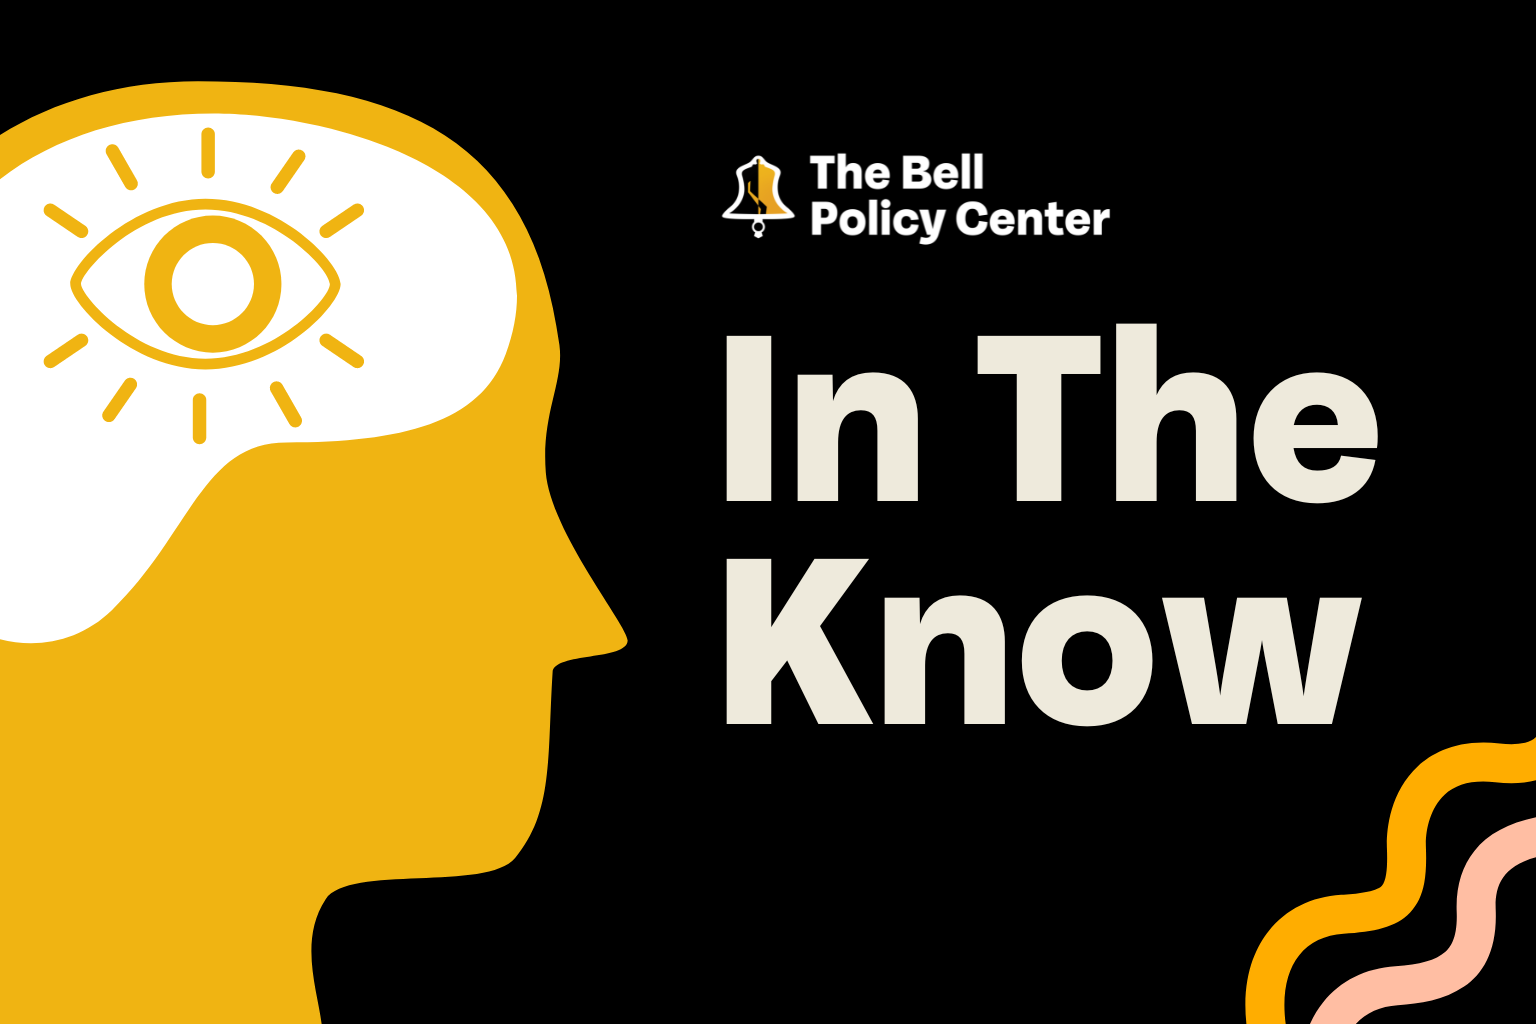 Graphic illustration depicting a human head silhouette with a lightbulb above, symbolizing ideas or knowledge, alongside the text "the bell policy center" and "in the know about Colorado issues.